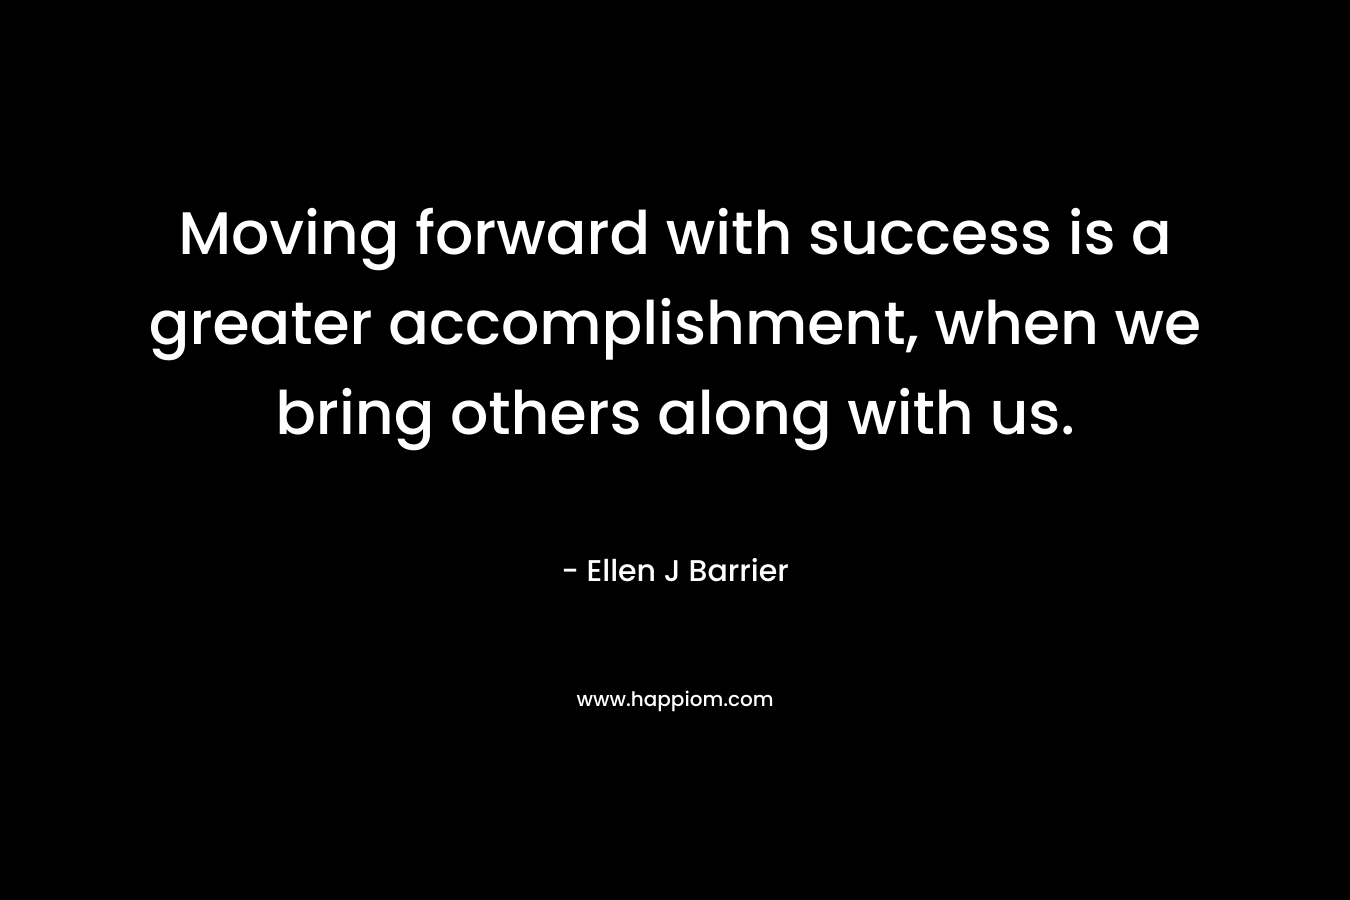 Moving forward with success is a greater accomplishment, when we bring others along with us.